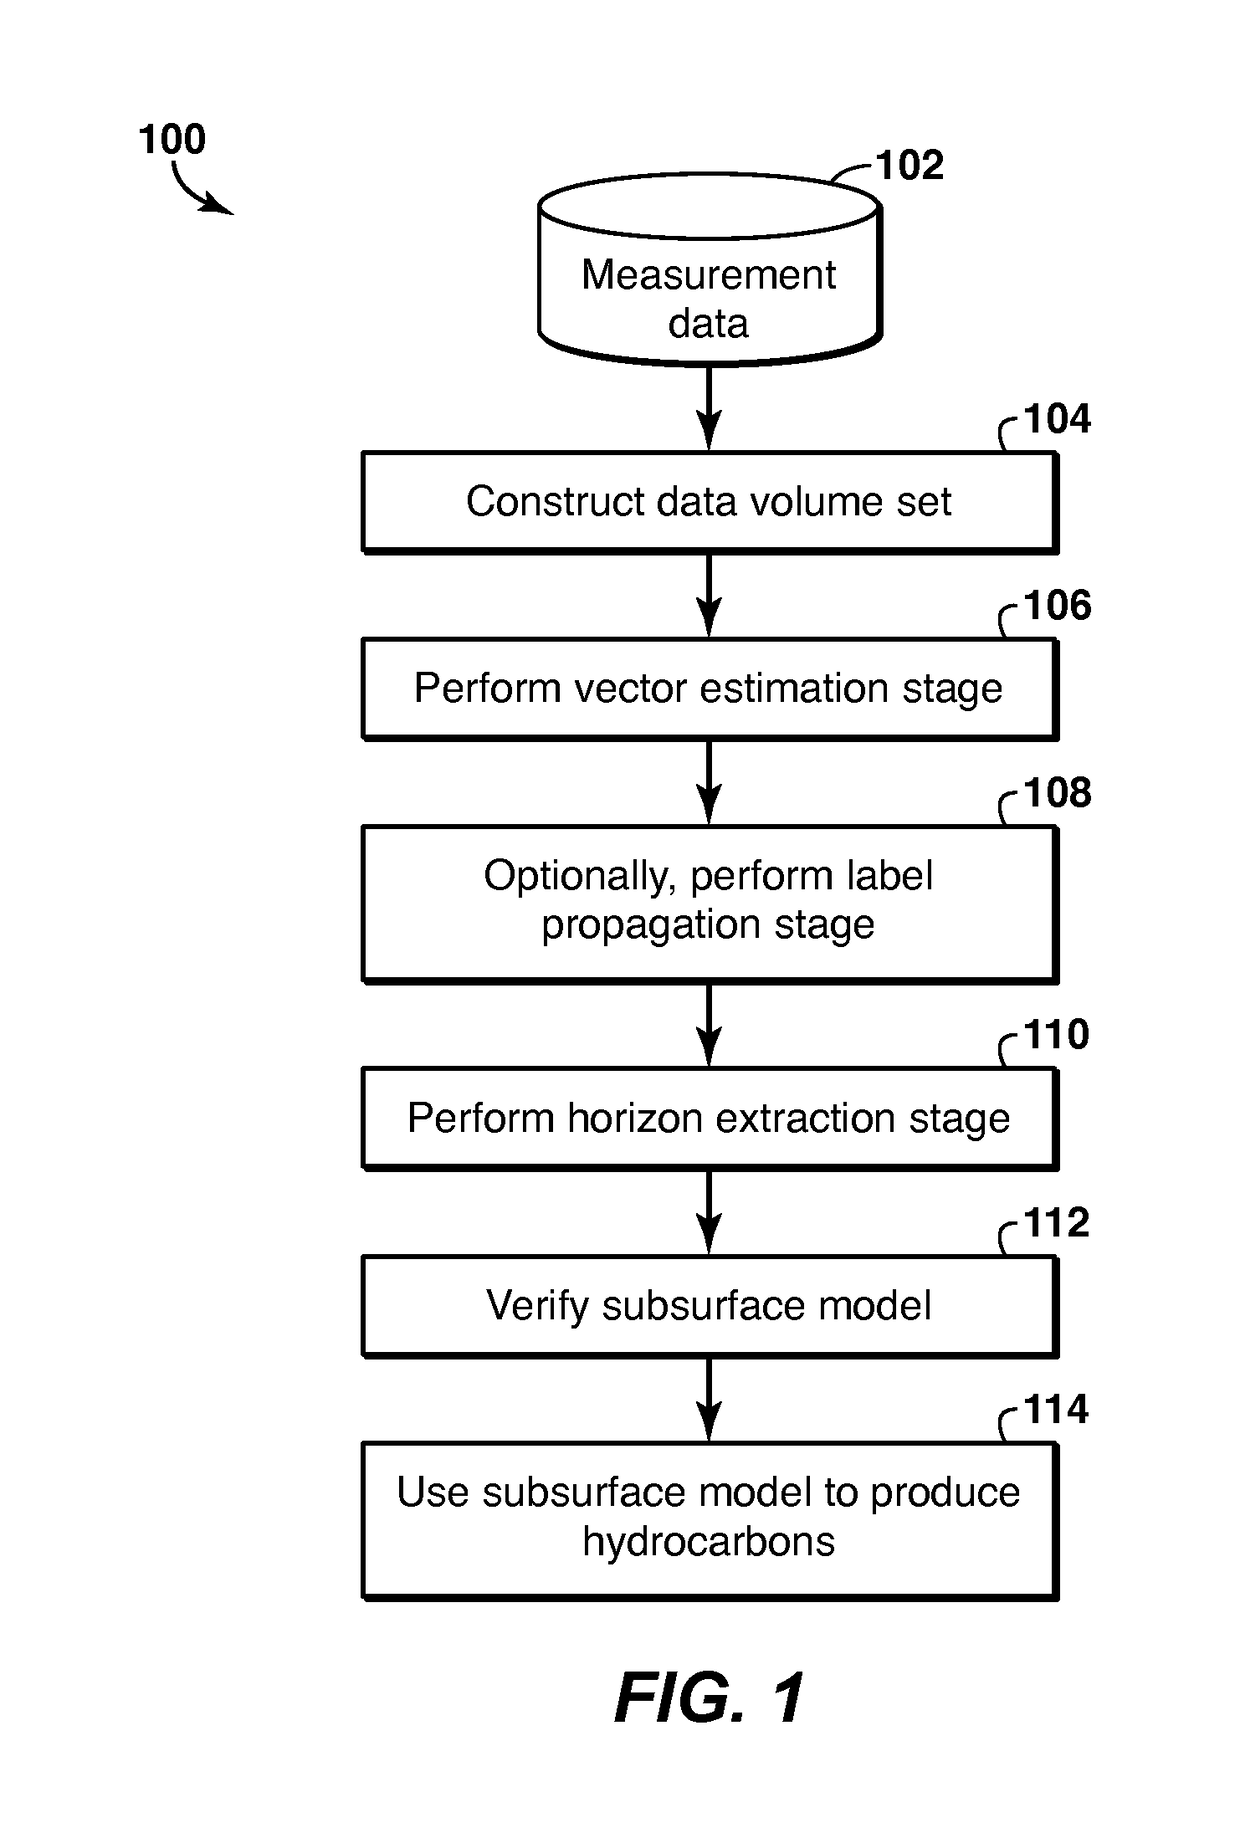 Method and system for geophysical modeling of subsurface volumes based on label propagation